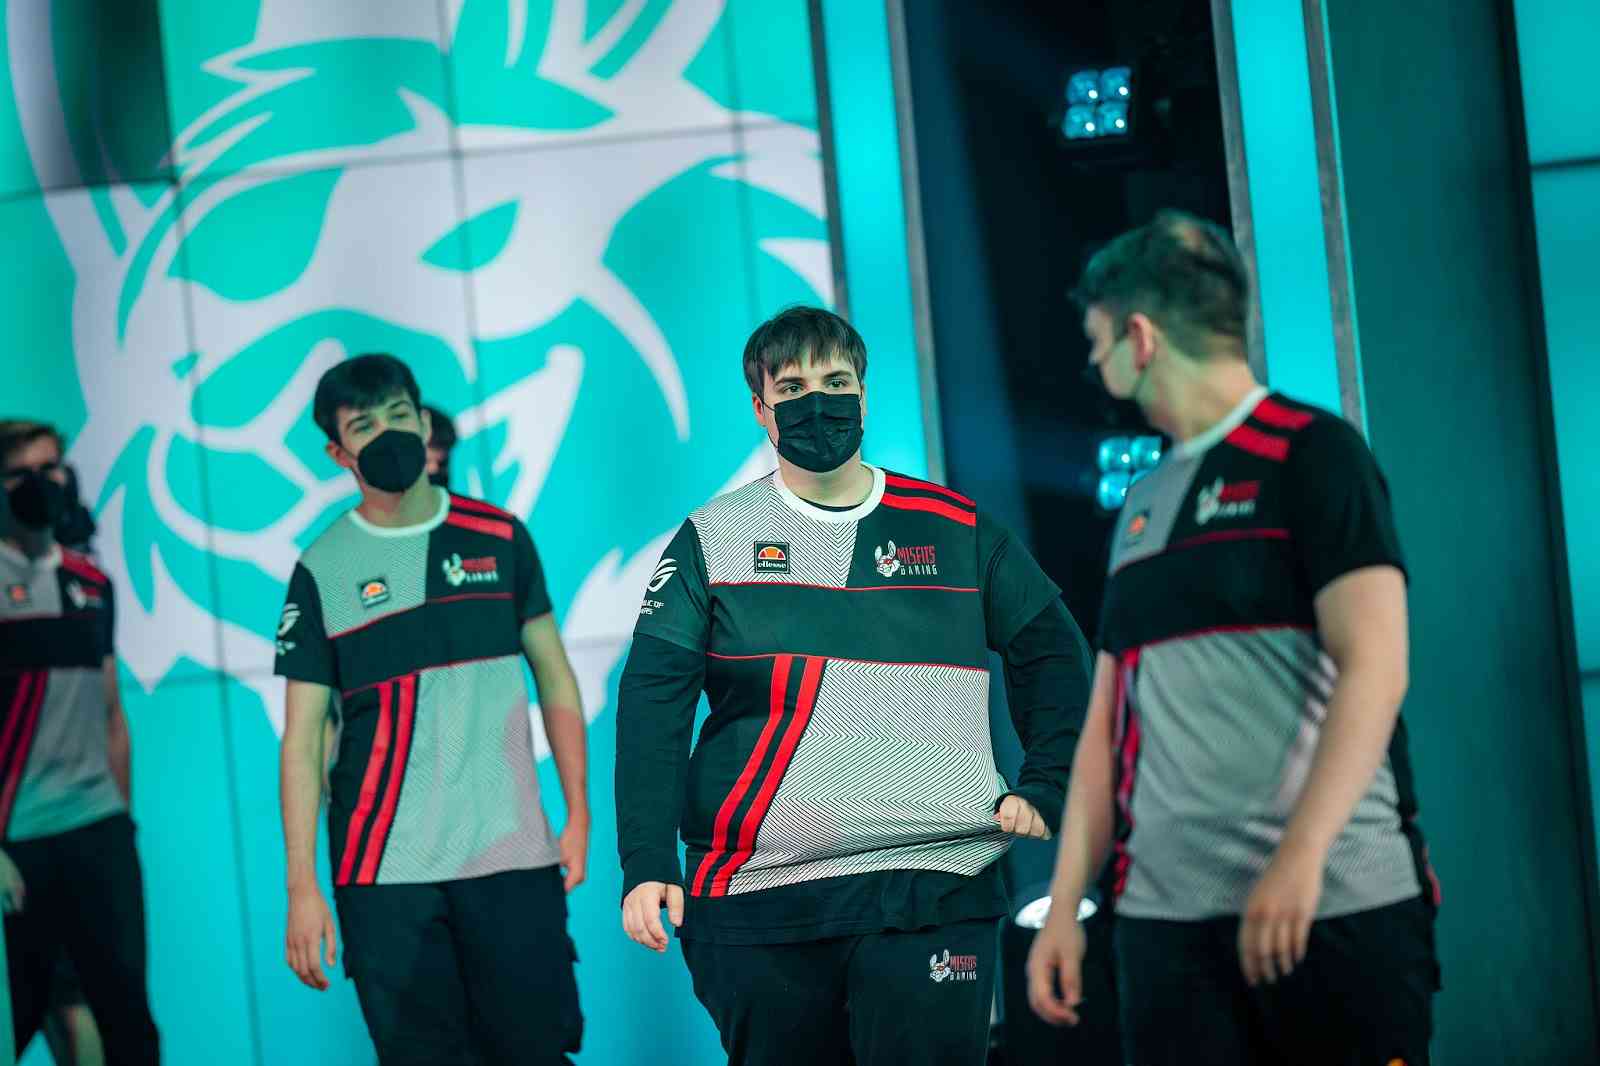 MSF Irrelevant walks on stage with his team mates ahead of a game in the LEC Summer Split